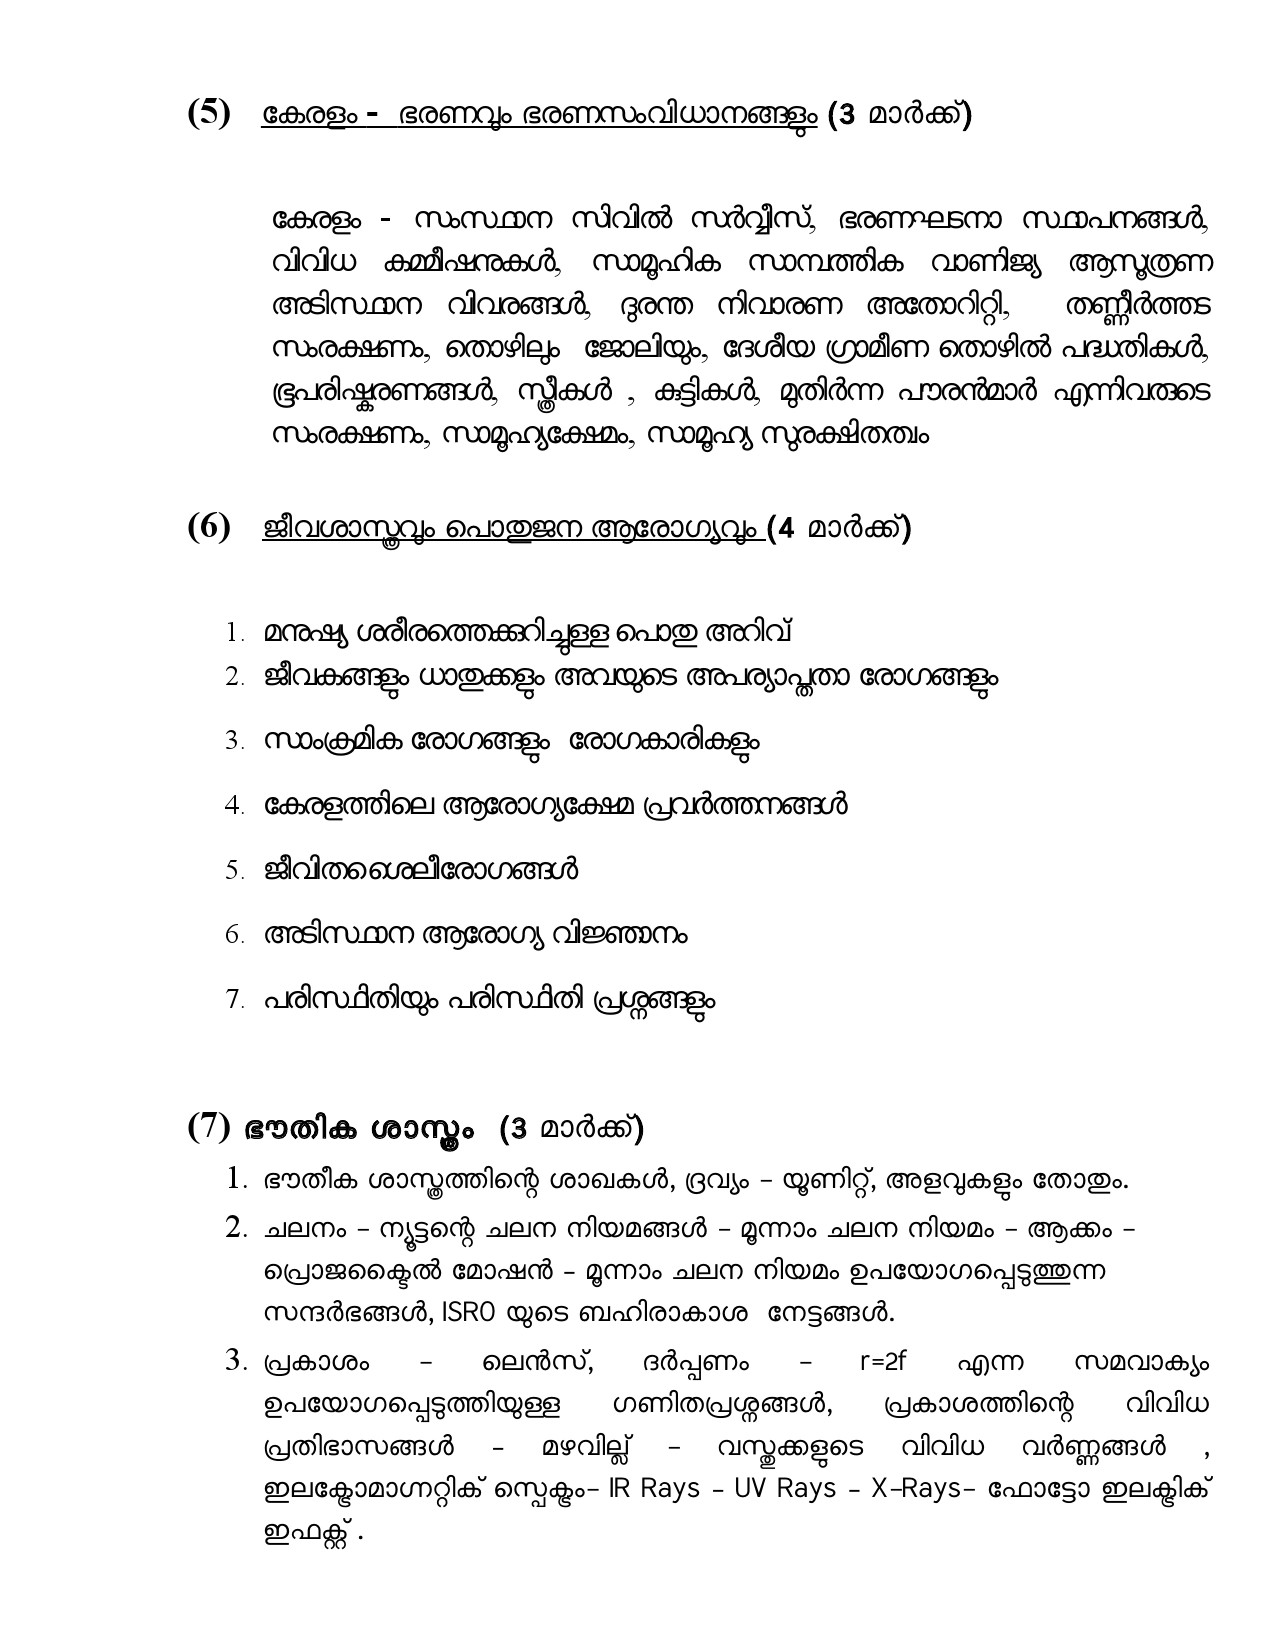 Beat Forest Officer Final Examination Syllabus For Plus Two Level - Notification Image 4